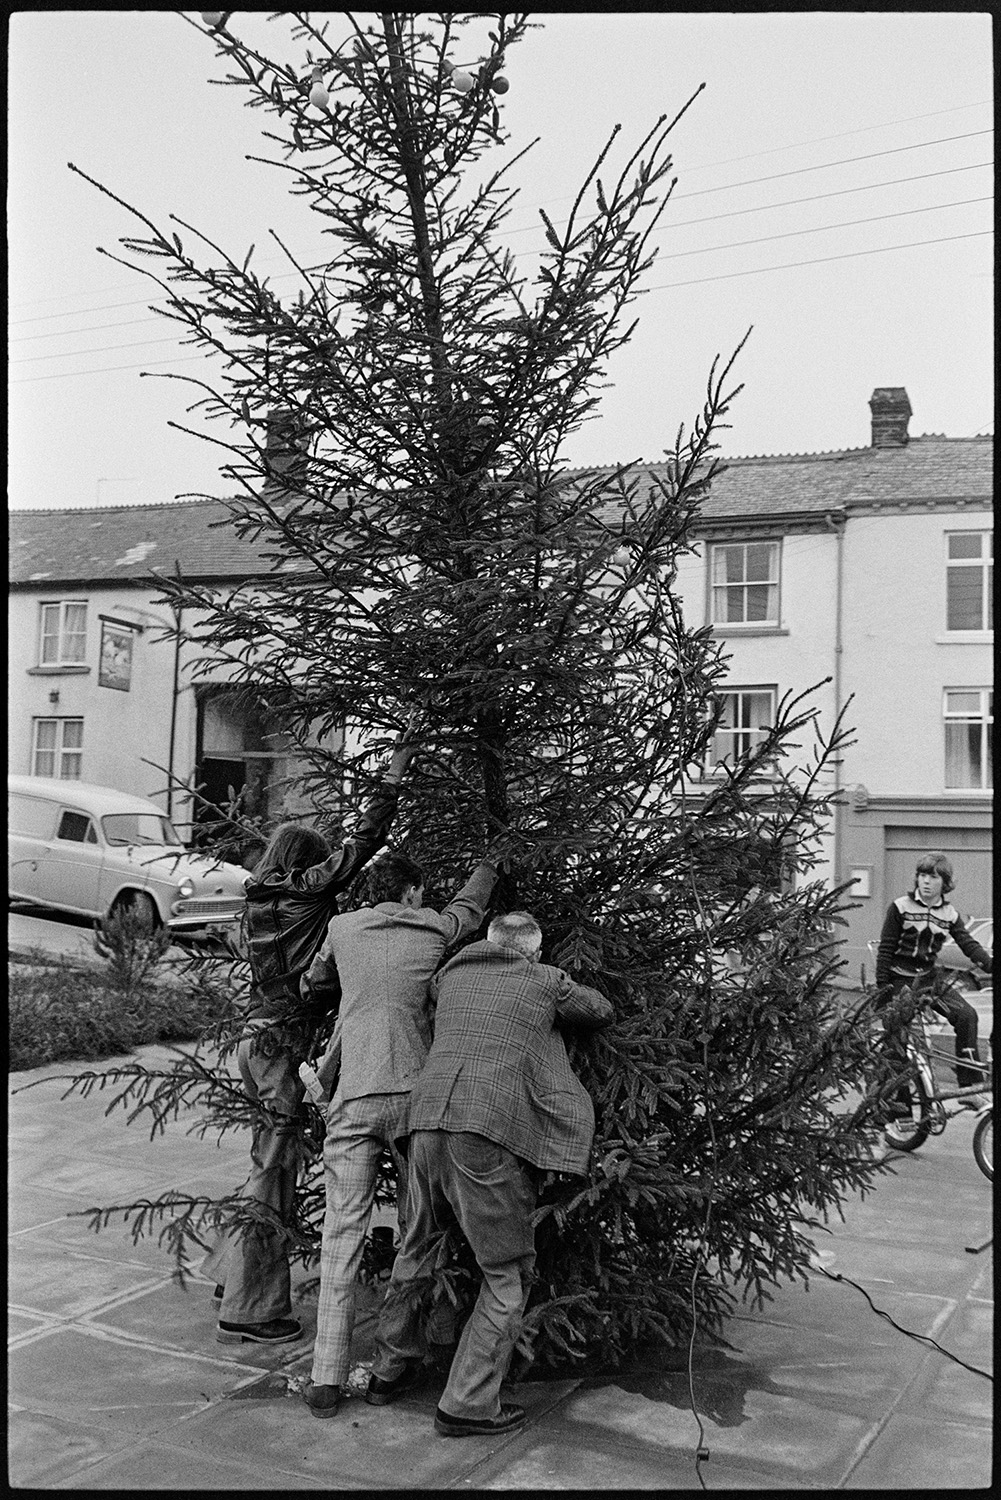 Putting up Christmas tree in town centre. 
[Three men putting up a Christmas tree in the town centre at Hatherleigh, opposite the Post Office. A boy on a bicycle is watching them.]